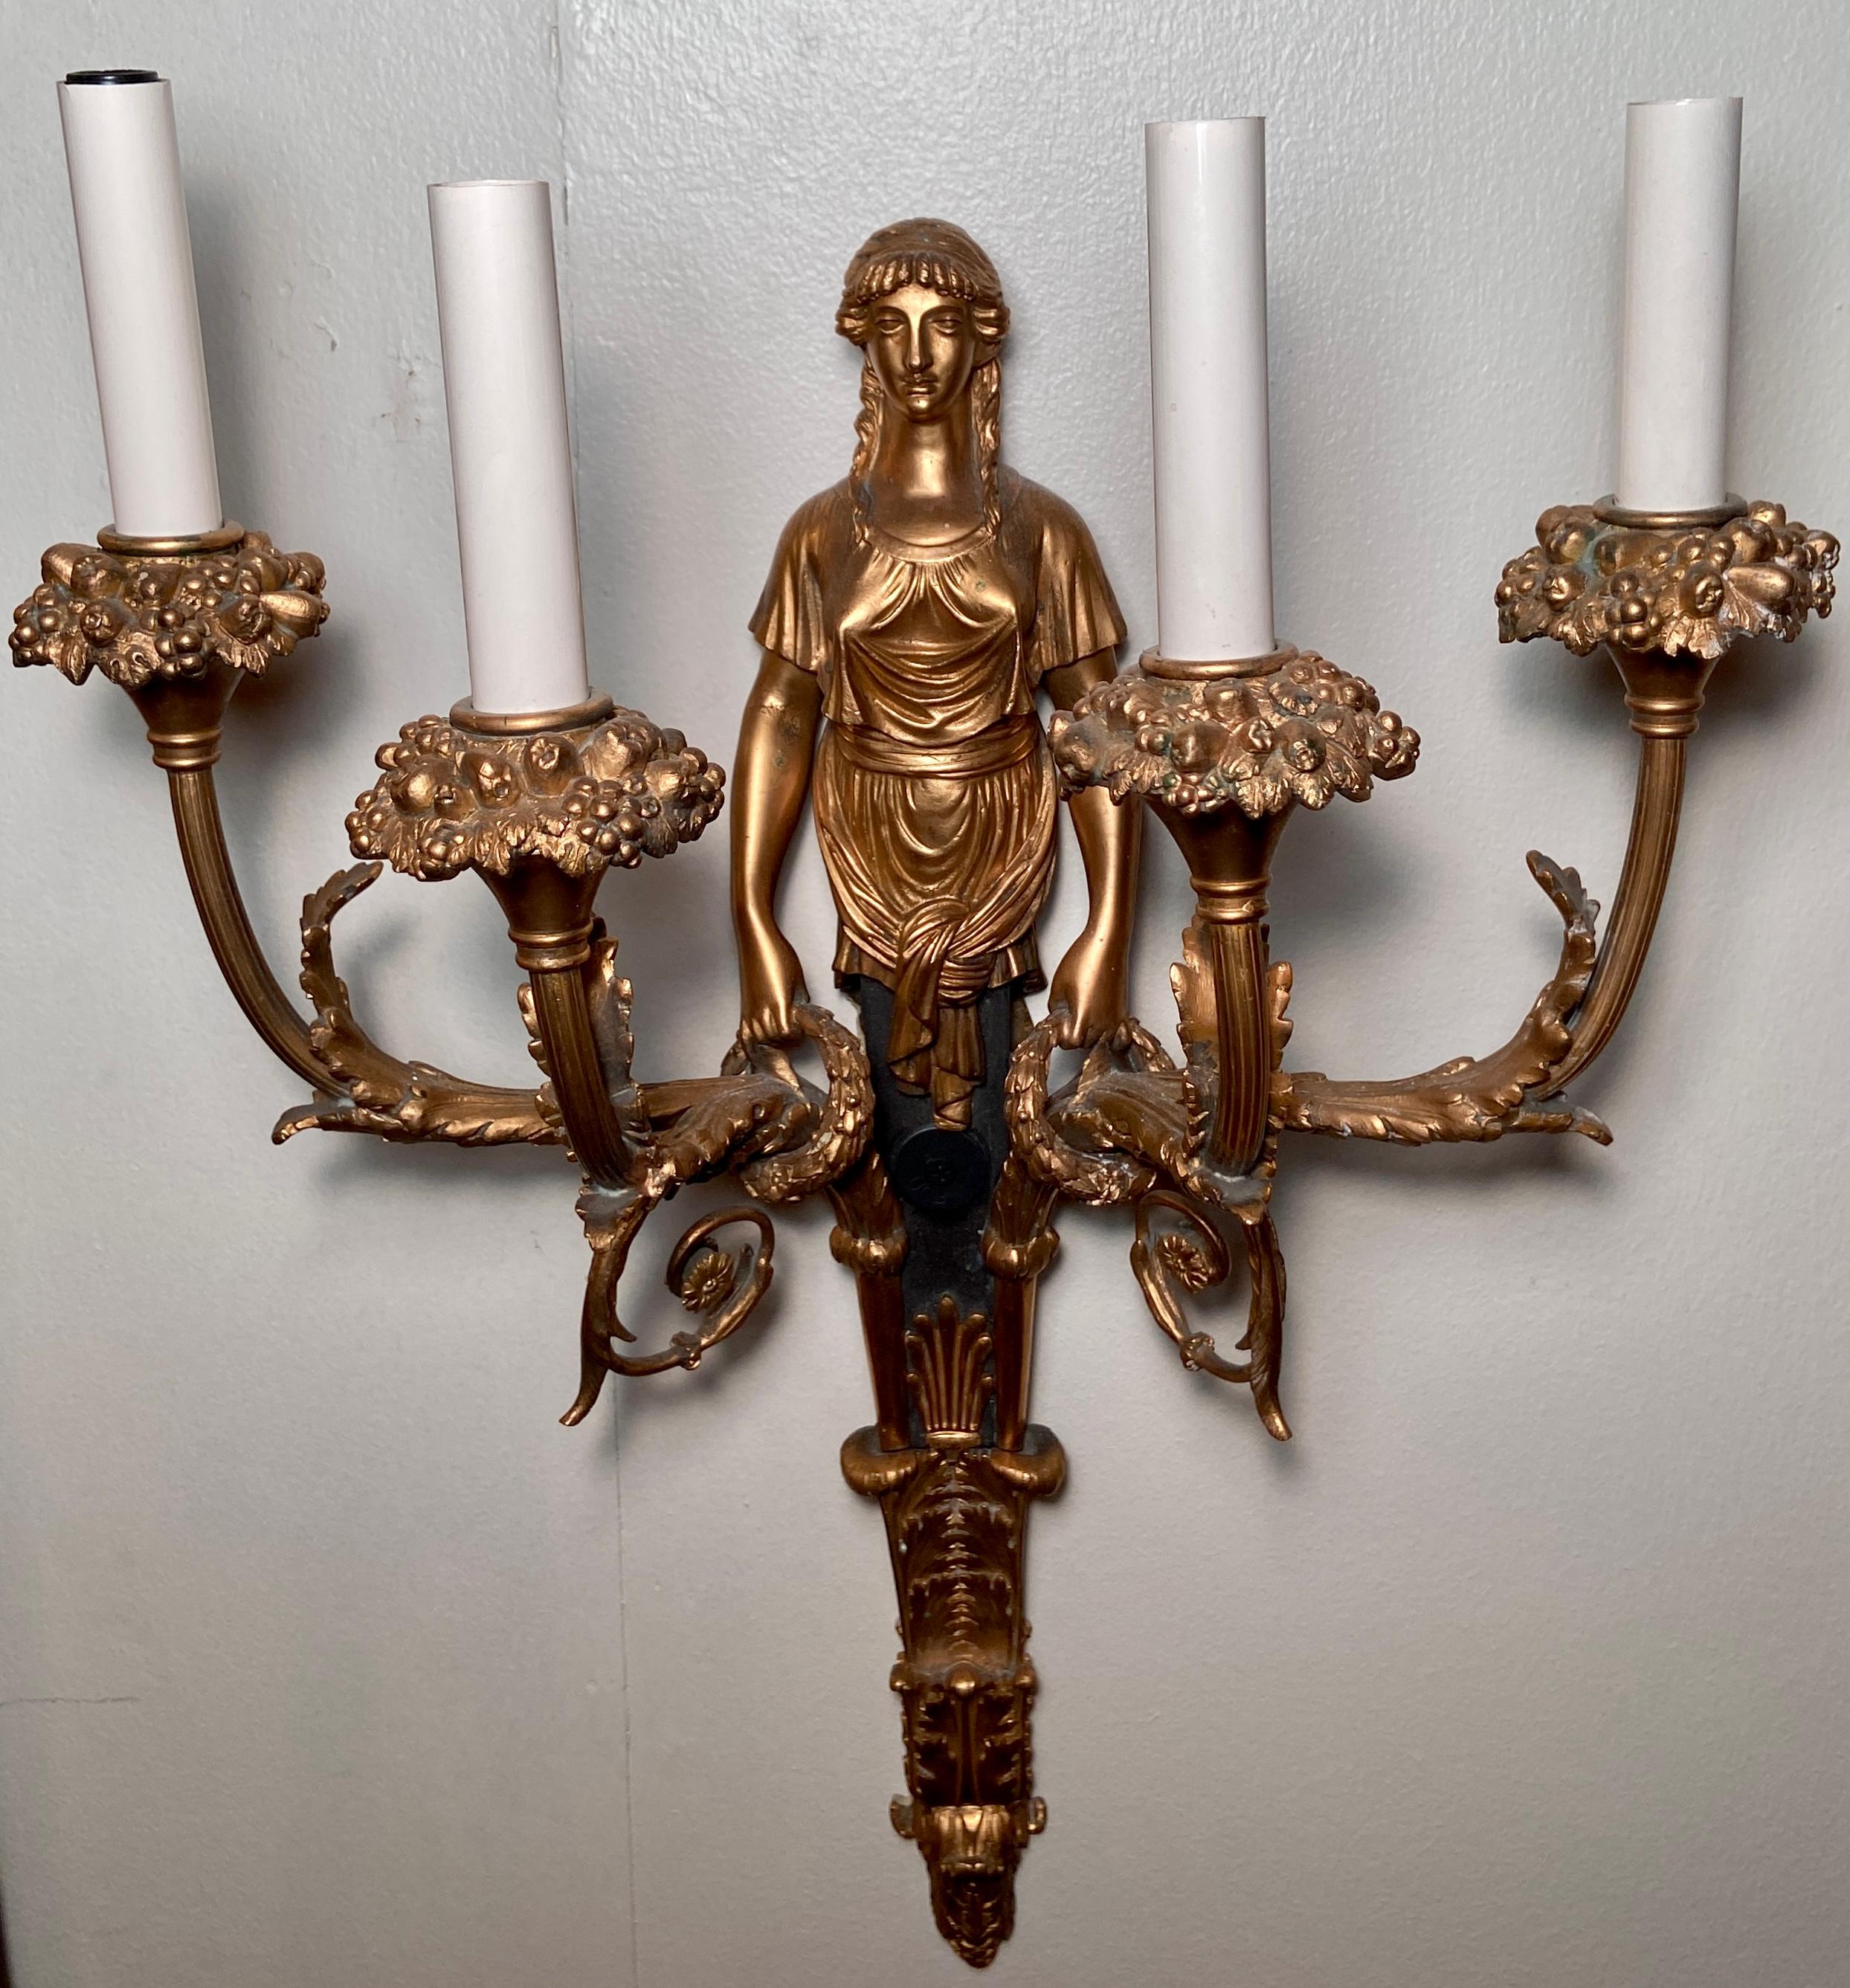 Pair antique bronze D'ore French Empire wall-lights, circa 1830-1850.